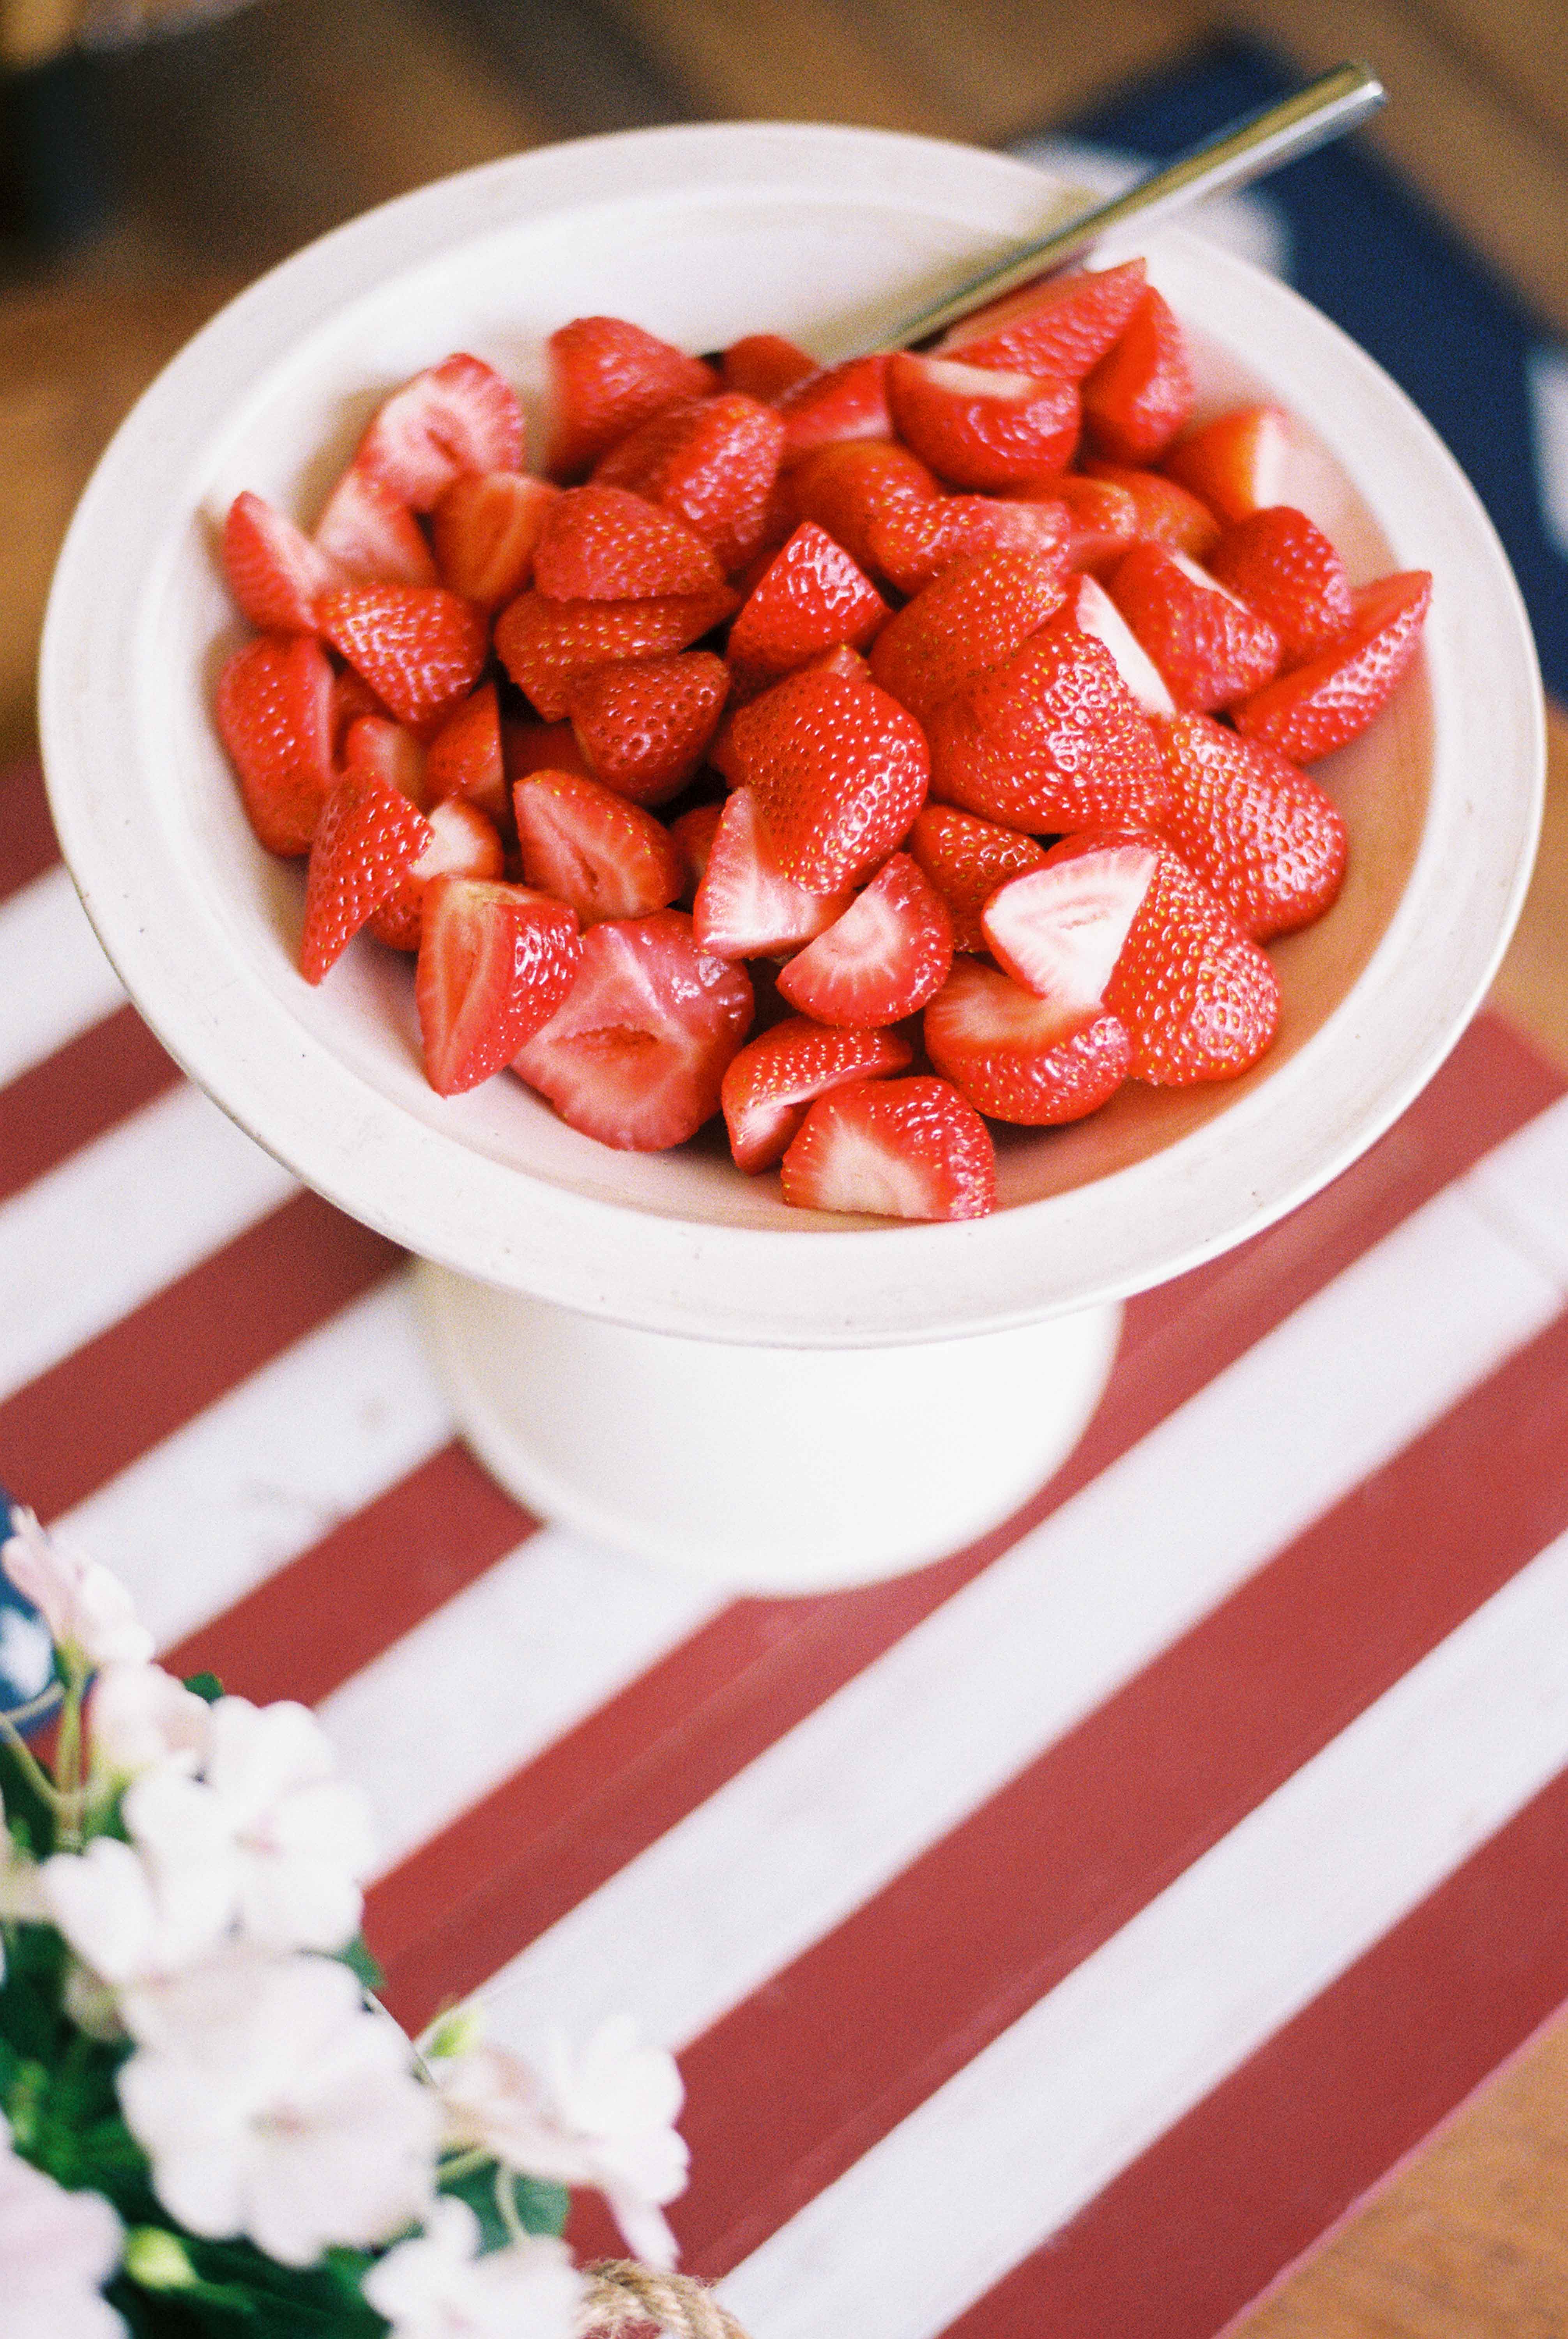 du soleil photographie, july 4th celebration, summer themed party, bbq party, event design, philadelphia lifestyle photographer, american lifestyle, summer drinks, vintage furniture